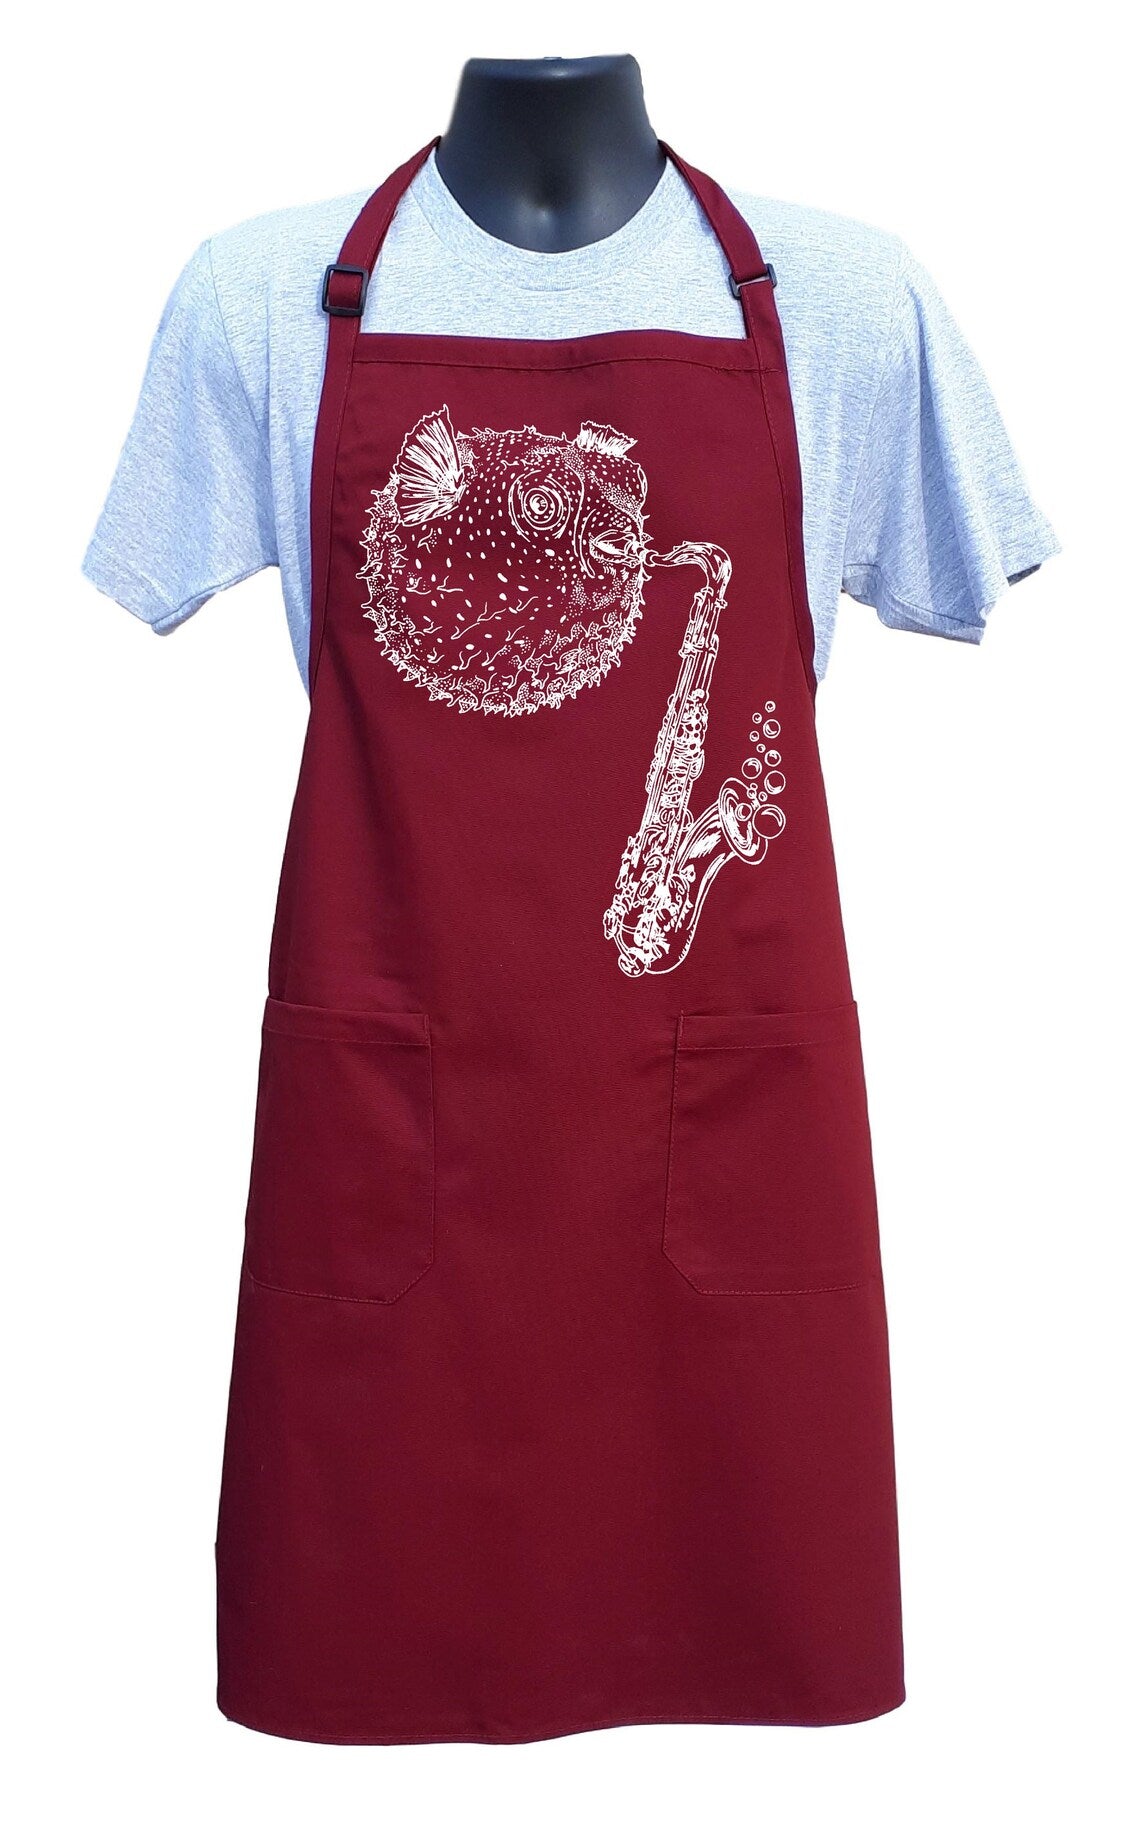 Blowfish Playing Saxophone Chef's Apron with Pockets